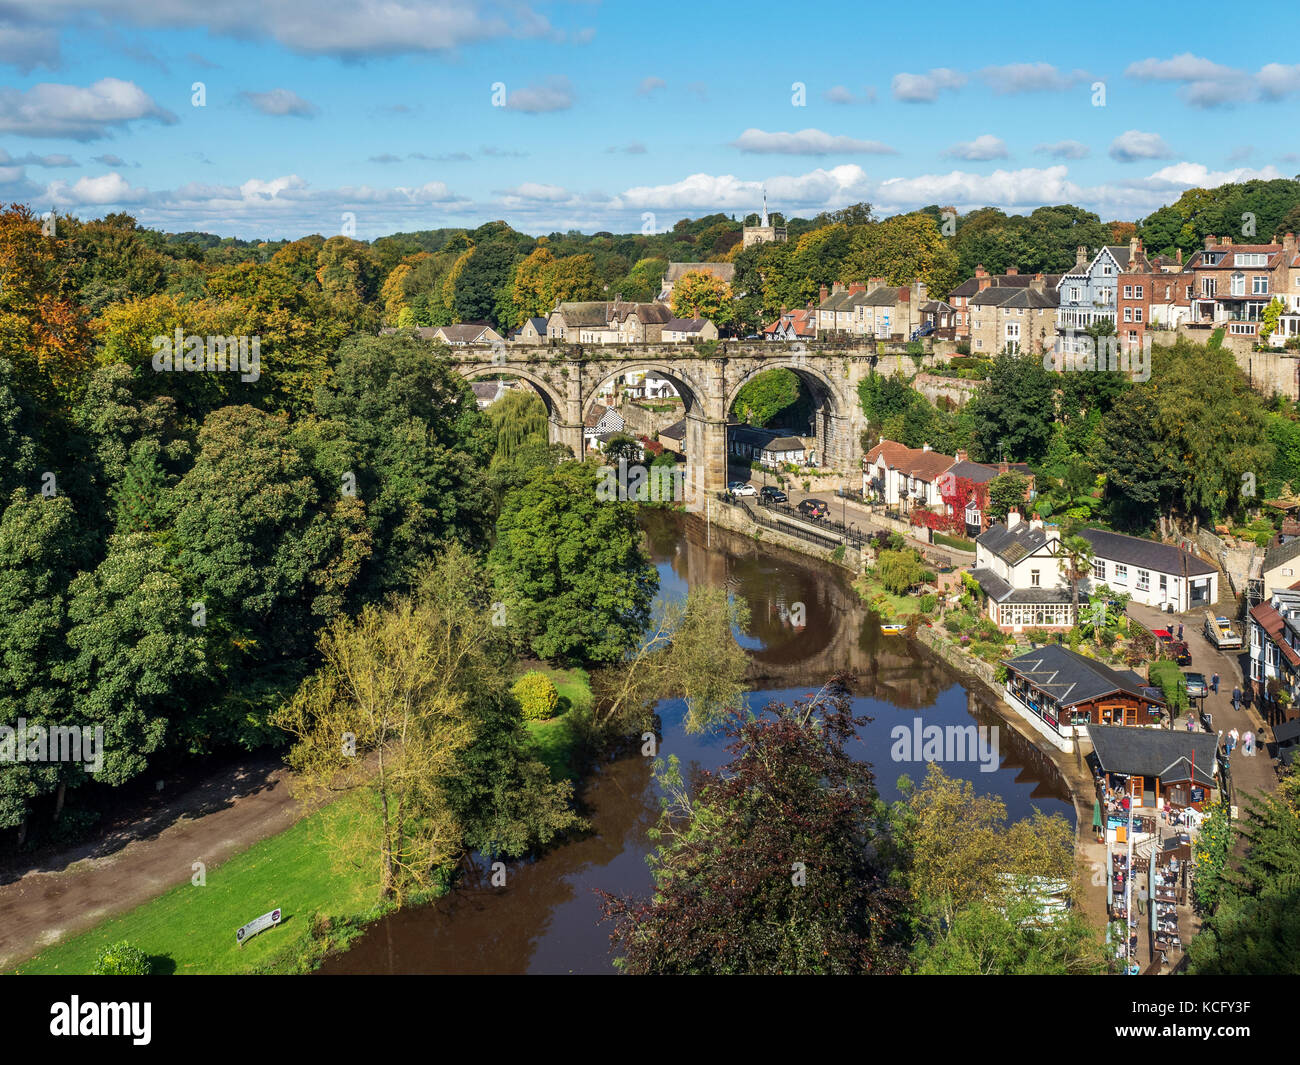 Railway Viaduct over the River Nidd in Early Autumn at Knaresborough North Yorkshire England Stock Photo